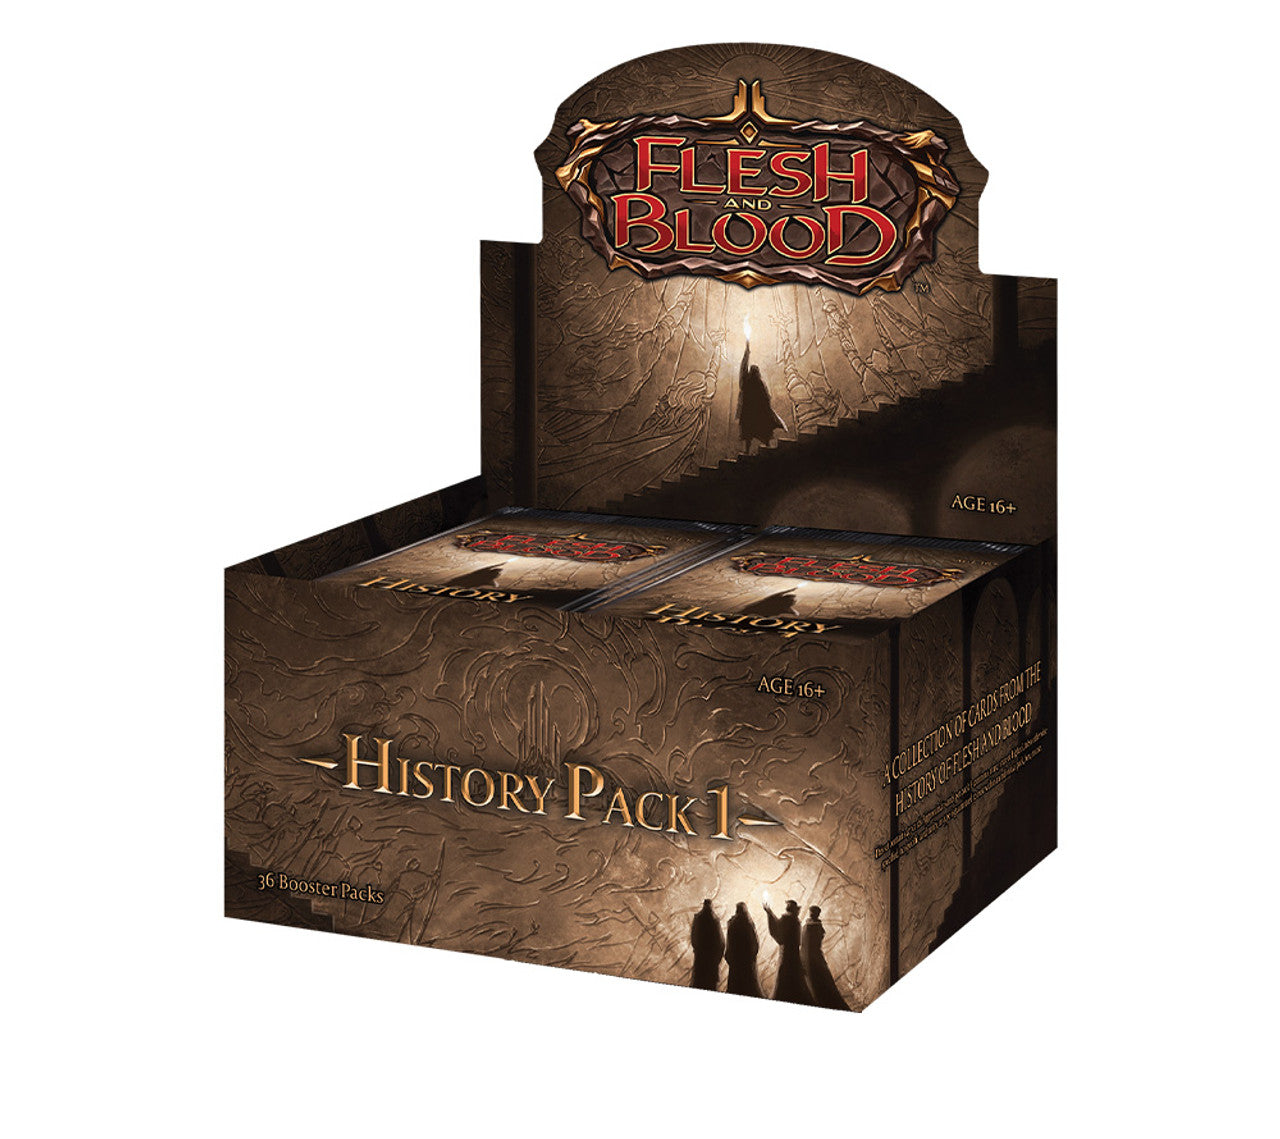 Flesh And Blood - History Pack 1 - Booster Box (36 packs)